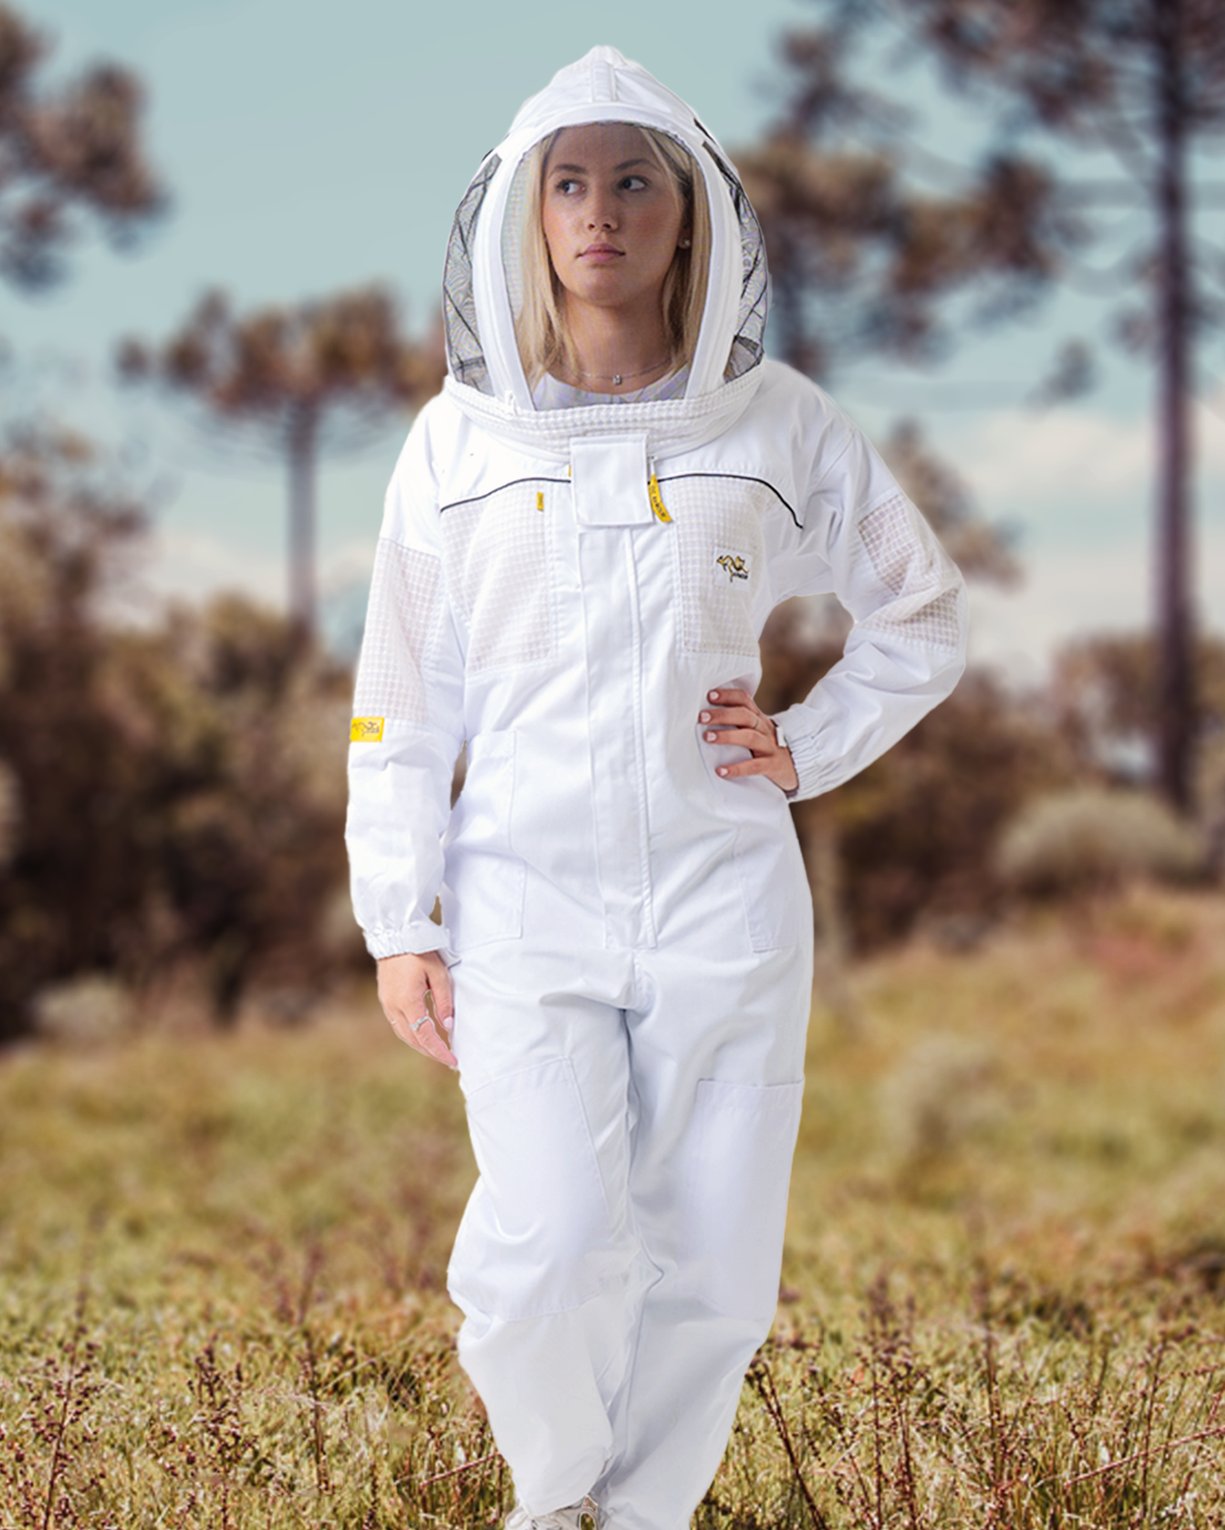 A woman also wearing a Beekeeping Suit